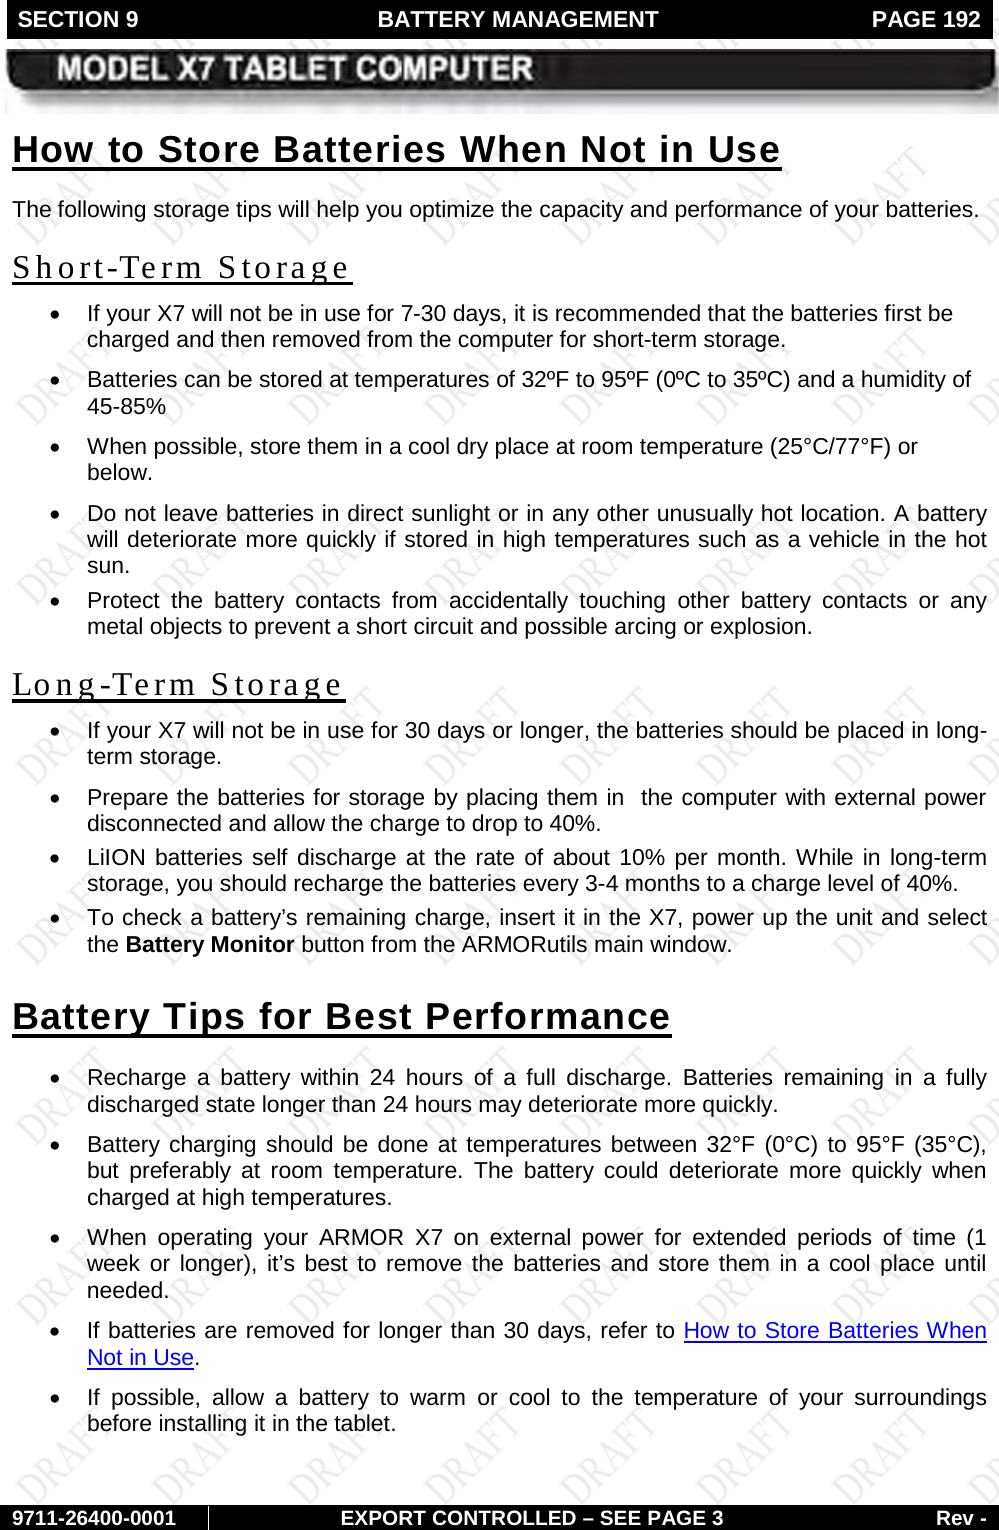 SECTION 9  BATTERY MANAGEMENT  PAGE 192        9711-26400-0001 EXPORT CONTROLLED – SEE PAGE 3 Rev - The following storage tips will help you optimize the capacity and performance of your batteries. How to Store Batteries When Not in Use • If your X7 will not be in use for 7-30 days, it is recommended that the batteries first be charged and then removed from the computer for short-term storage. Short-Term Storage • Batteries can be stored at temperatures of 32ºF to 95ºF (0ºC to 35ºC) and a humidity of 45-85% • When possible, store them in a cool dry place at room temperature (25°C/77°F) or below. • Do not leave batteries in direct sunlight or in any other unusually hot location. A battery will deteriorate more quickly if stored in high temperatures such as a vehicle in the hot sun.  • Protect the battery contacts from accidentally touching other battery contacts or any metal objects to prevent a short circuit and possible arcing or explosion. • If your X7 will not be in use for 30 days or longer, the batteries should be placed in long-term storage. Long-Term Storage • Prepare the batteries for storage by placing them in  the computer with external power disconnected and allow the charge to drop to 40%. • LiION batteries self discharge at the rate of about 10% per month. While in long-term storage, you should recharge the batteries every 3-4 months to a charge level of 40%.  •  To check a battery’s remaining charge, insert it in the X7, power up the unit and select the Battery Monitor button from the ARMORutils main window. • Recharge  a  battery  within 24 hours of a full discharge. Batteries remaining in a fully discharged state longer than 24 hours may deteriorate more quickly.  Battery Tips for Best Performance • Battery charging should be done at temperatures between 32°F (0°C) to 95°F (35°C), but preferably at room temperature. The battery could deteriorate more quickly when charged at high temperatures. • When operating your ARMOR X7 on external power for extended periods of time (1 week or longer), it’s best to remove the batteries and store them in a cool place until needed.  • If batteries are removed for longer than 30 days, refer to How to Store Batteries When Not in Use. • If possible, allow a battery to warm or cool to the temperature of your surroundings before installing it in the tablet. 